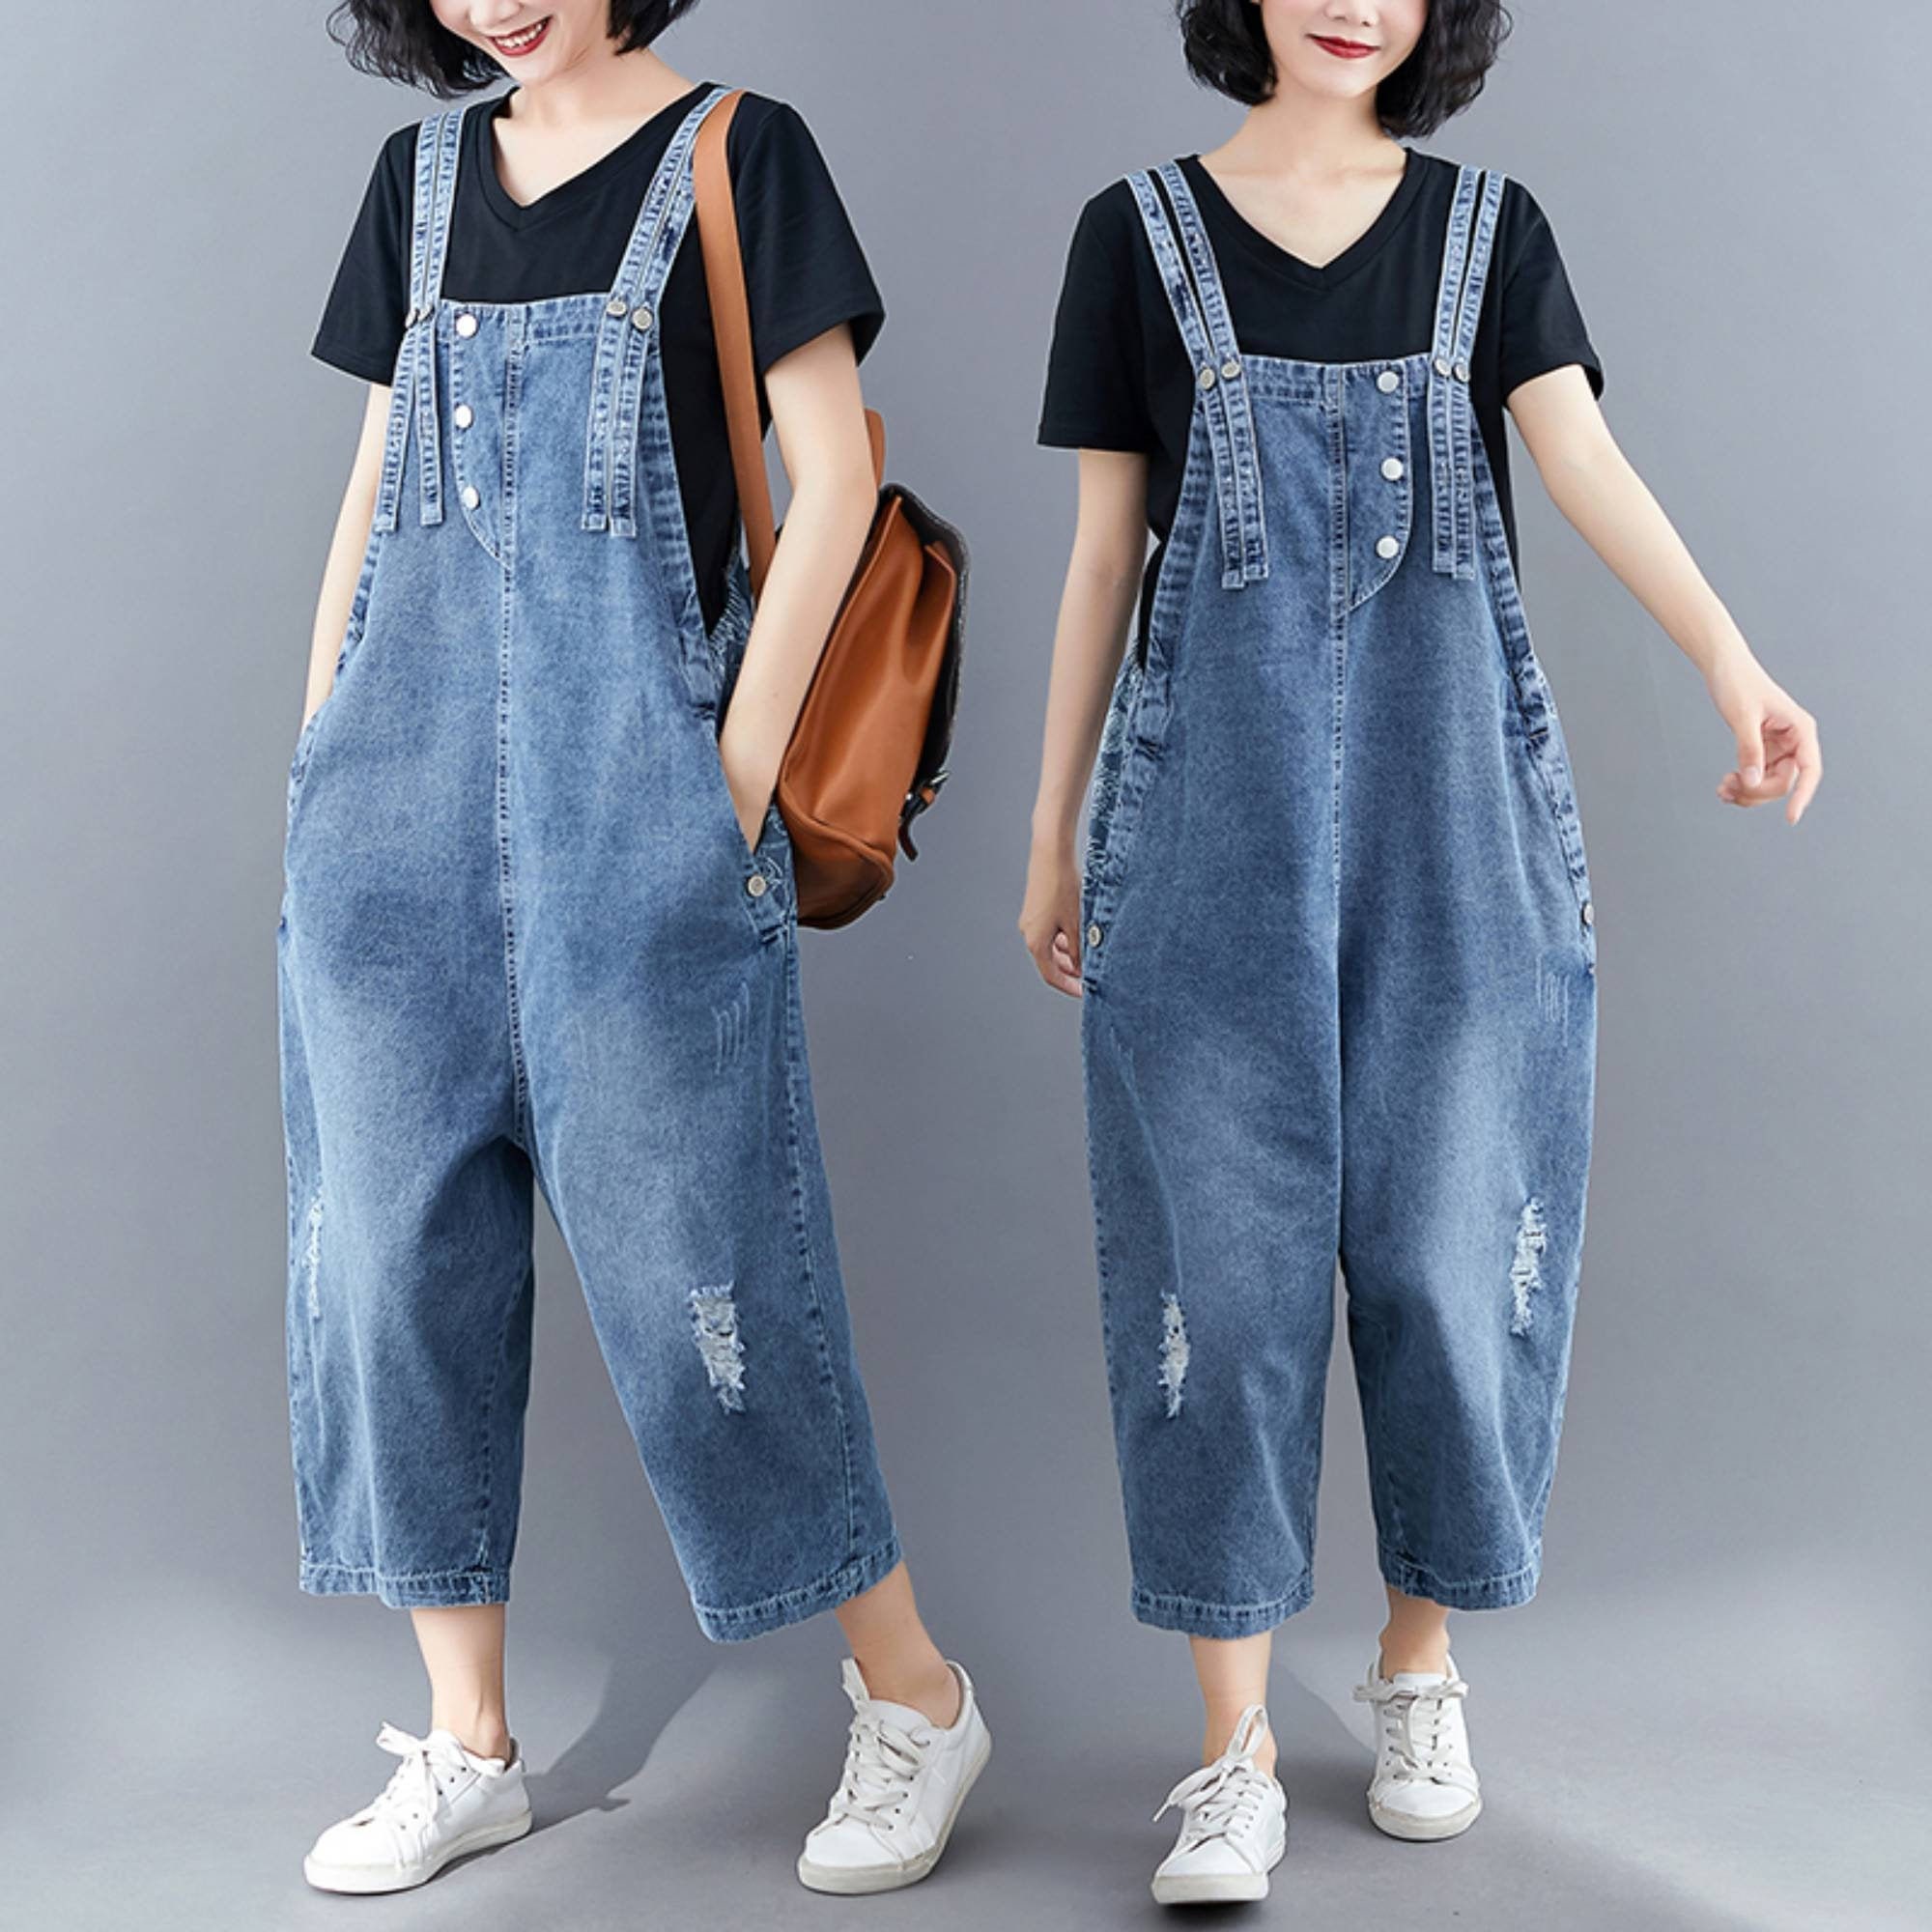 Wash Denim Overalls Baggy Jeans Jumpsuits Wide Leg Overall - Etsy UK